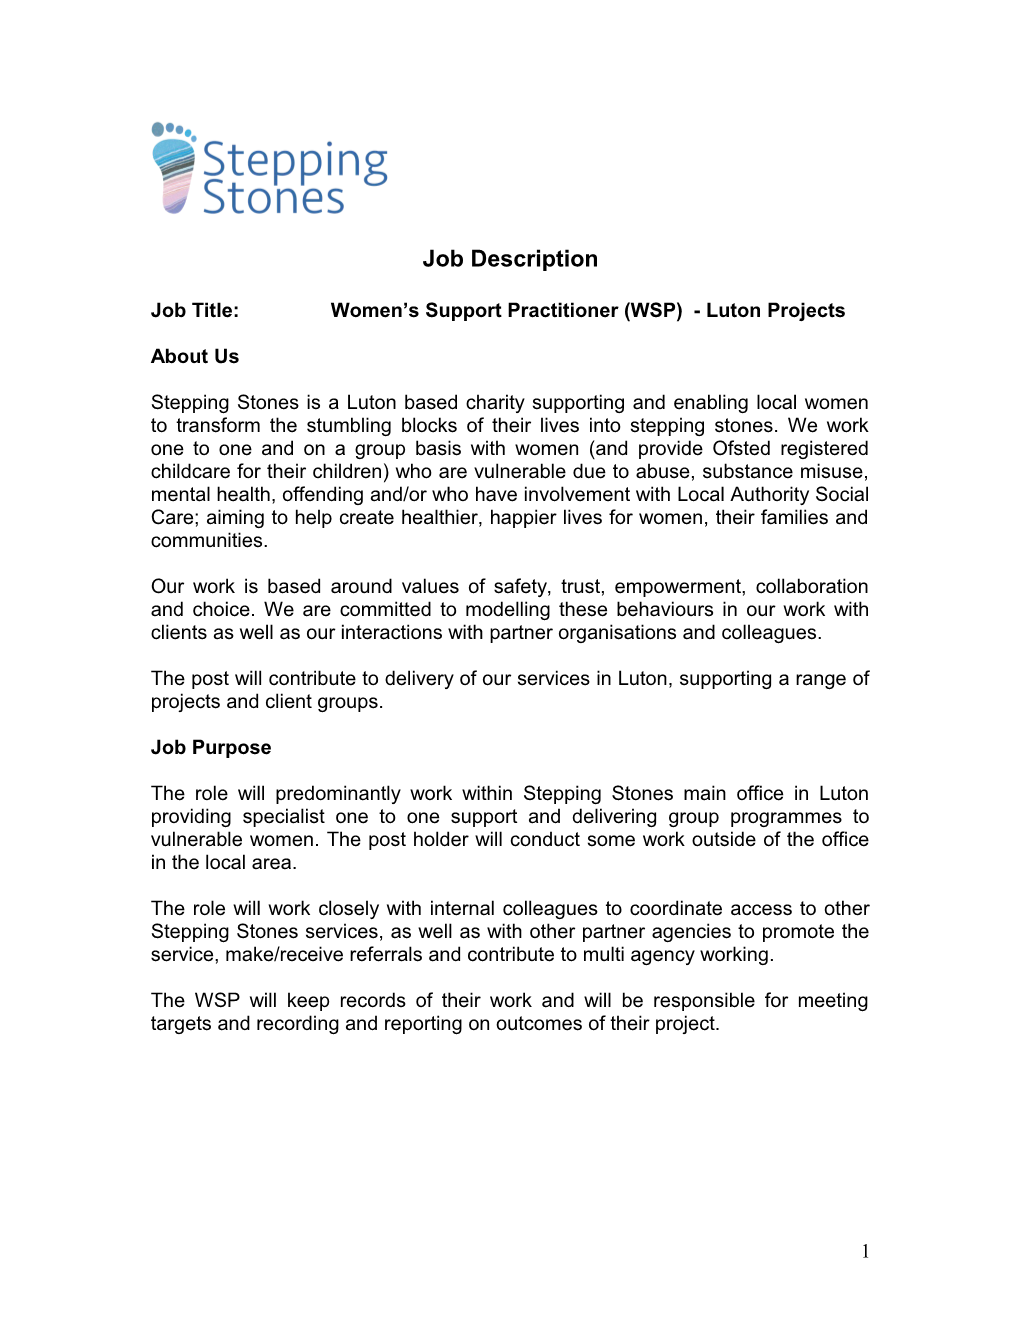 Job Title:Women S Supportpractitioner (WSP) -Luton Projects